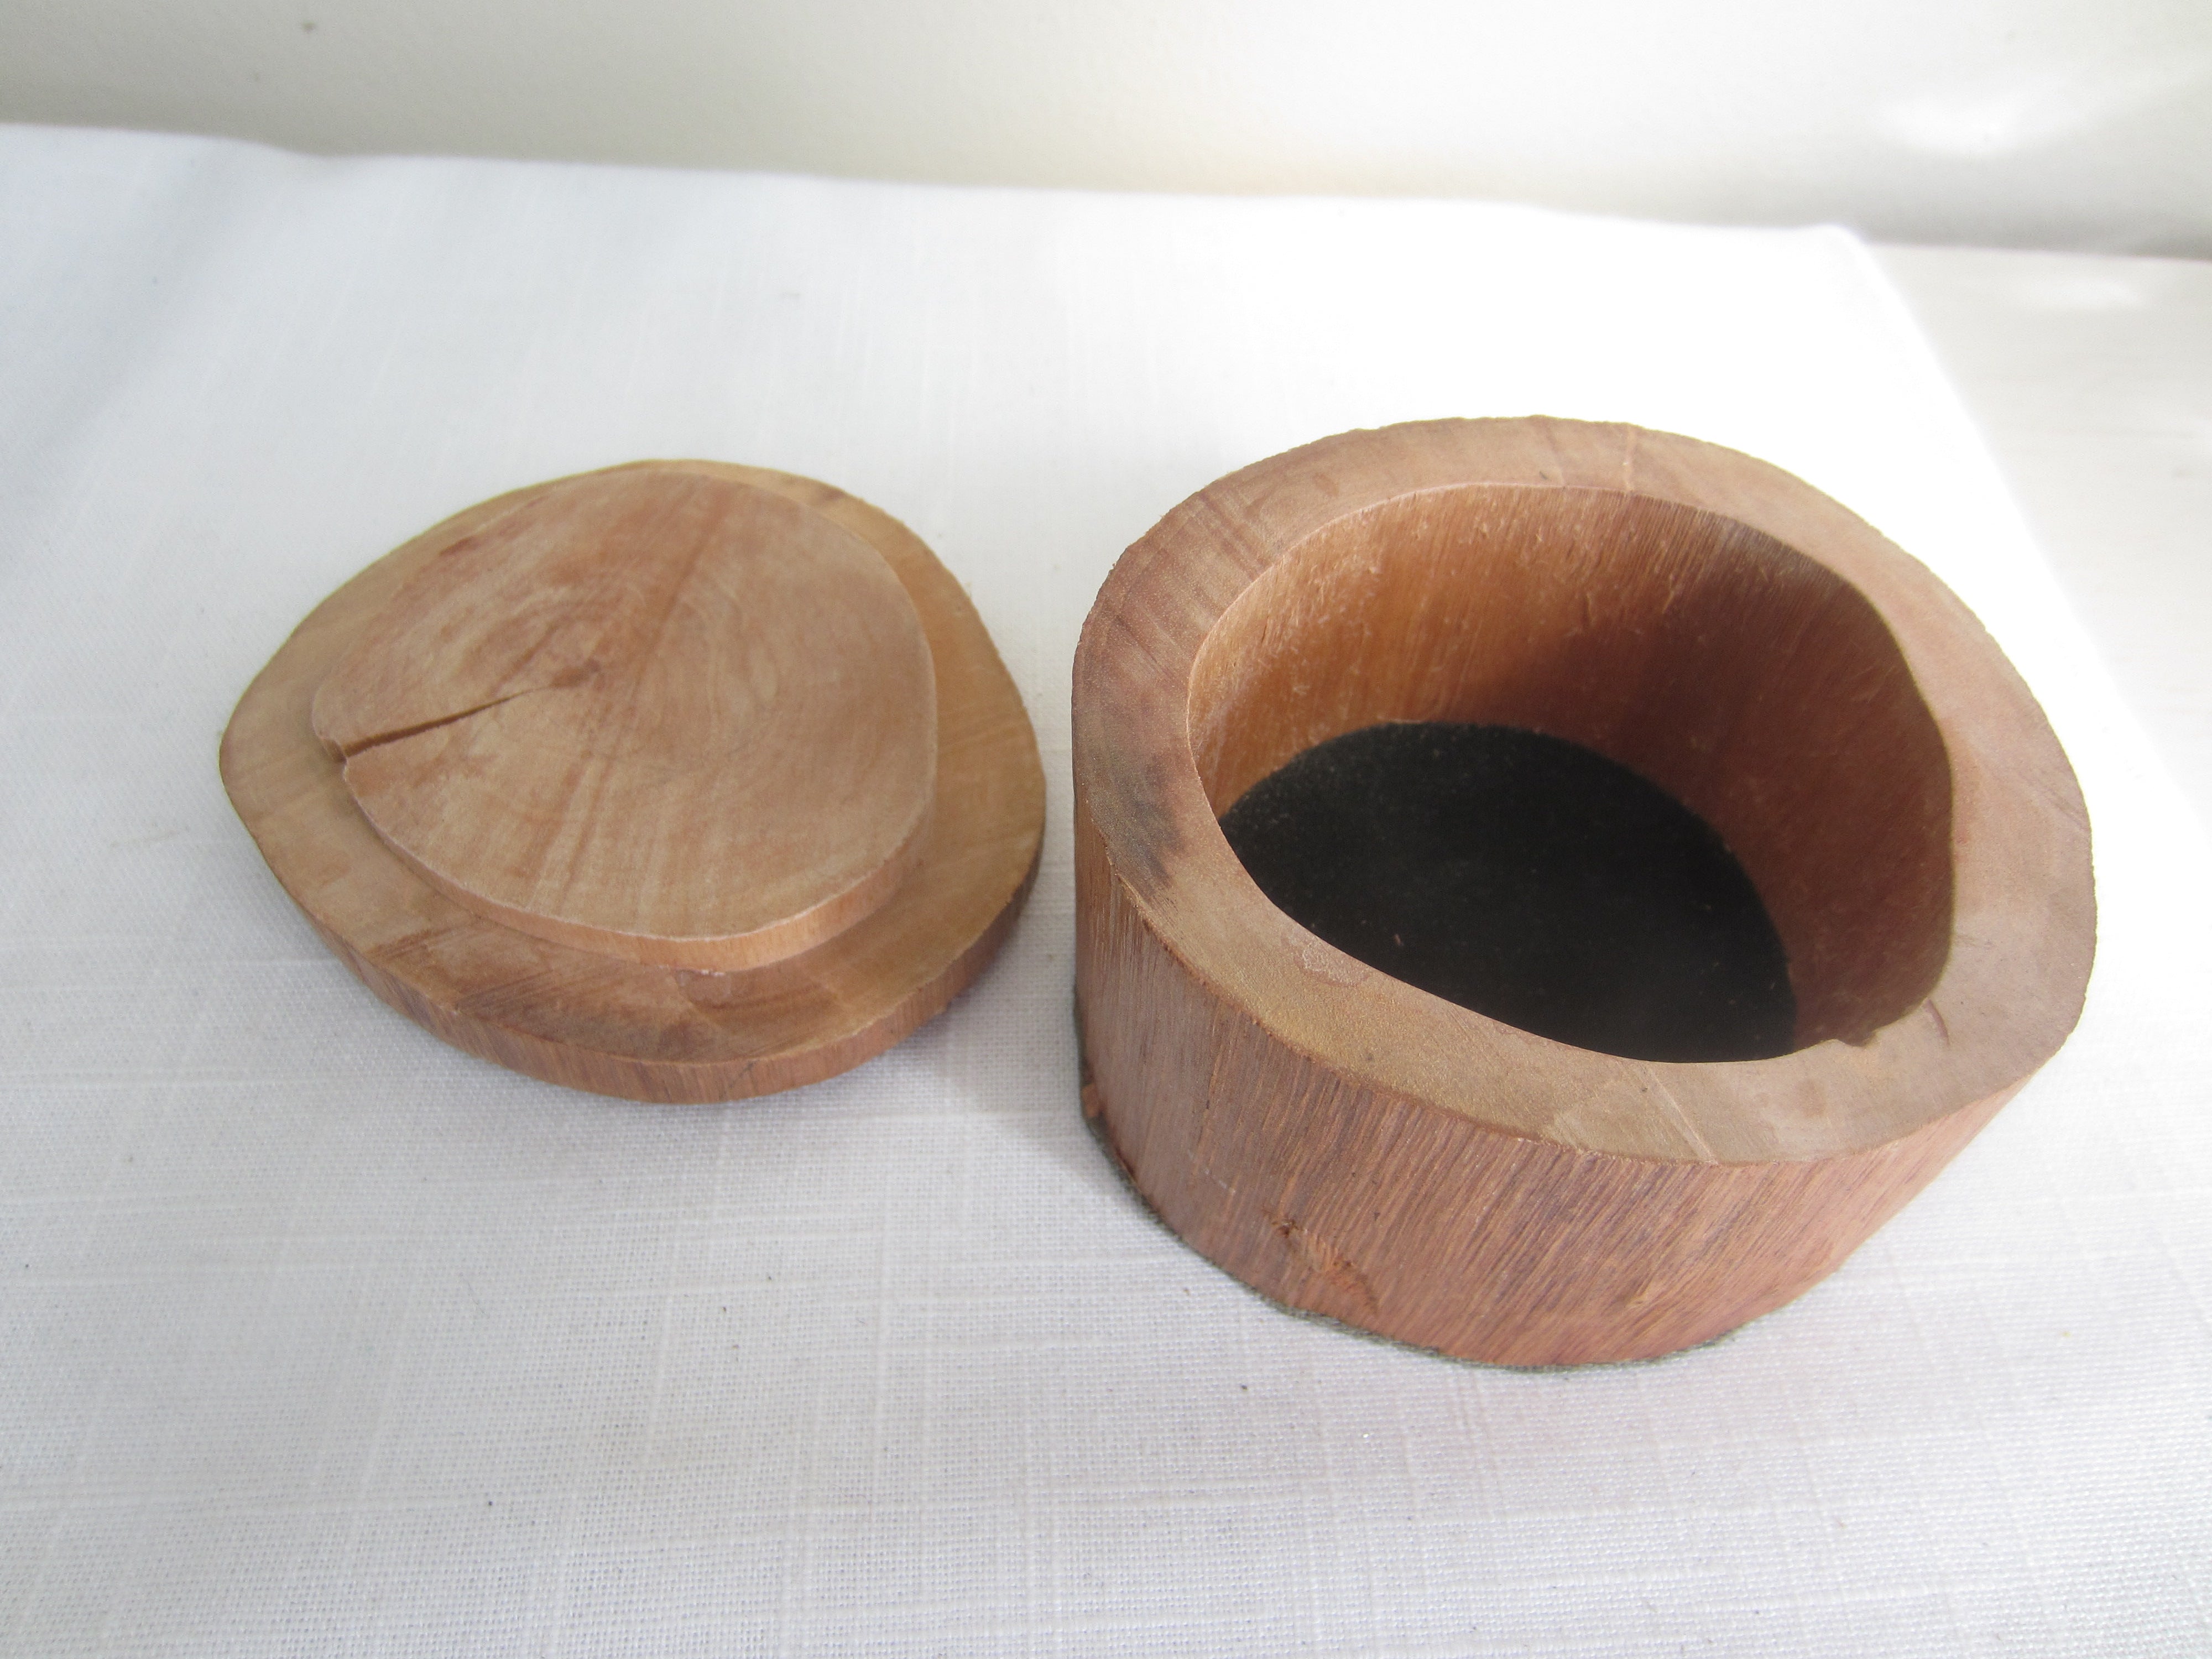 Wooden Trinket Box By LaValley's Woodshed